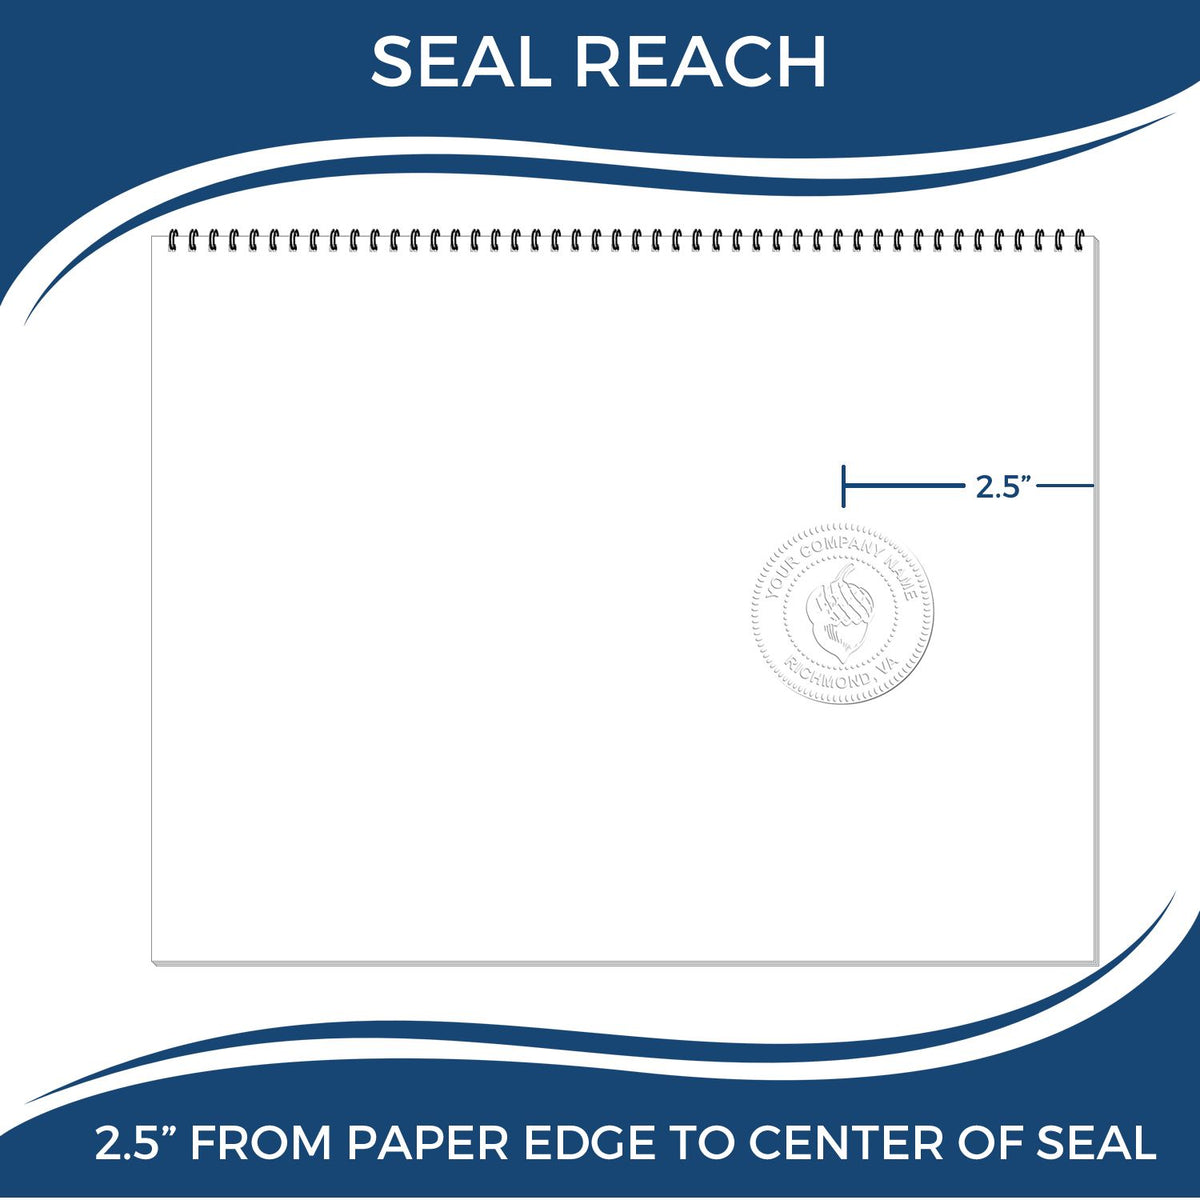 An infographic showing the seal reach which is represented by a ruler and a miniature seal image of the Heavy Duty Cast Iron Iowa Architect Embosser